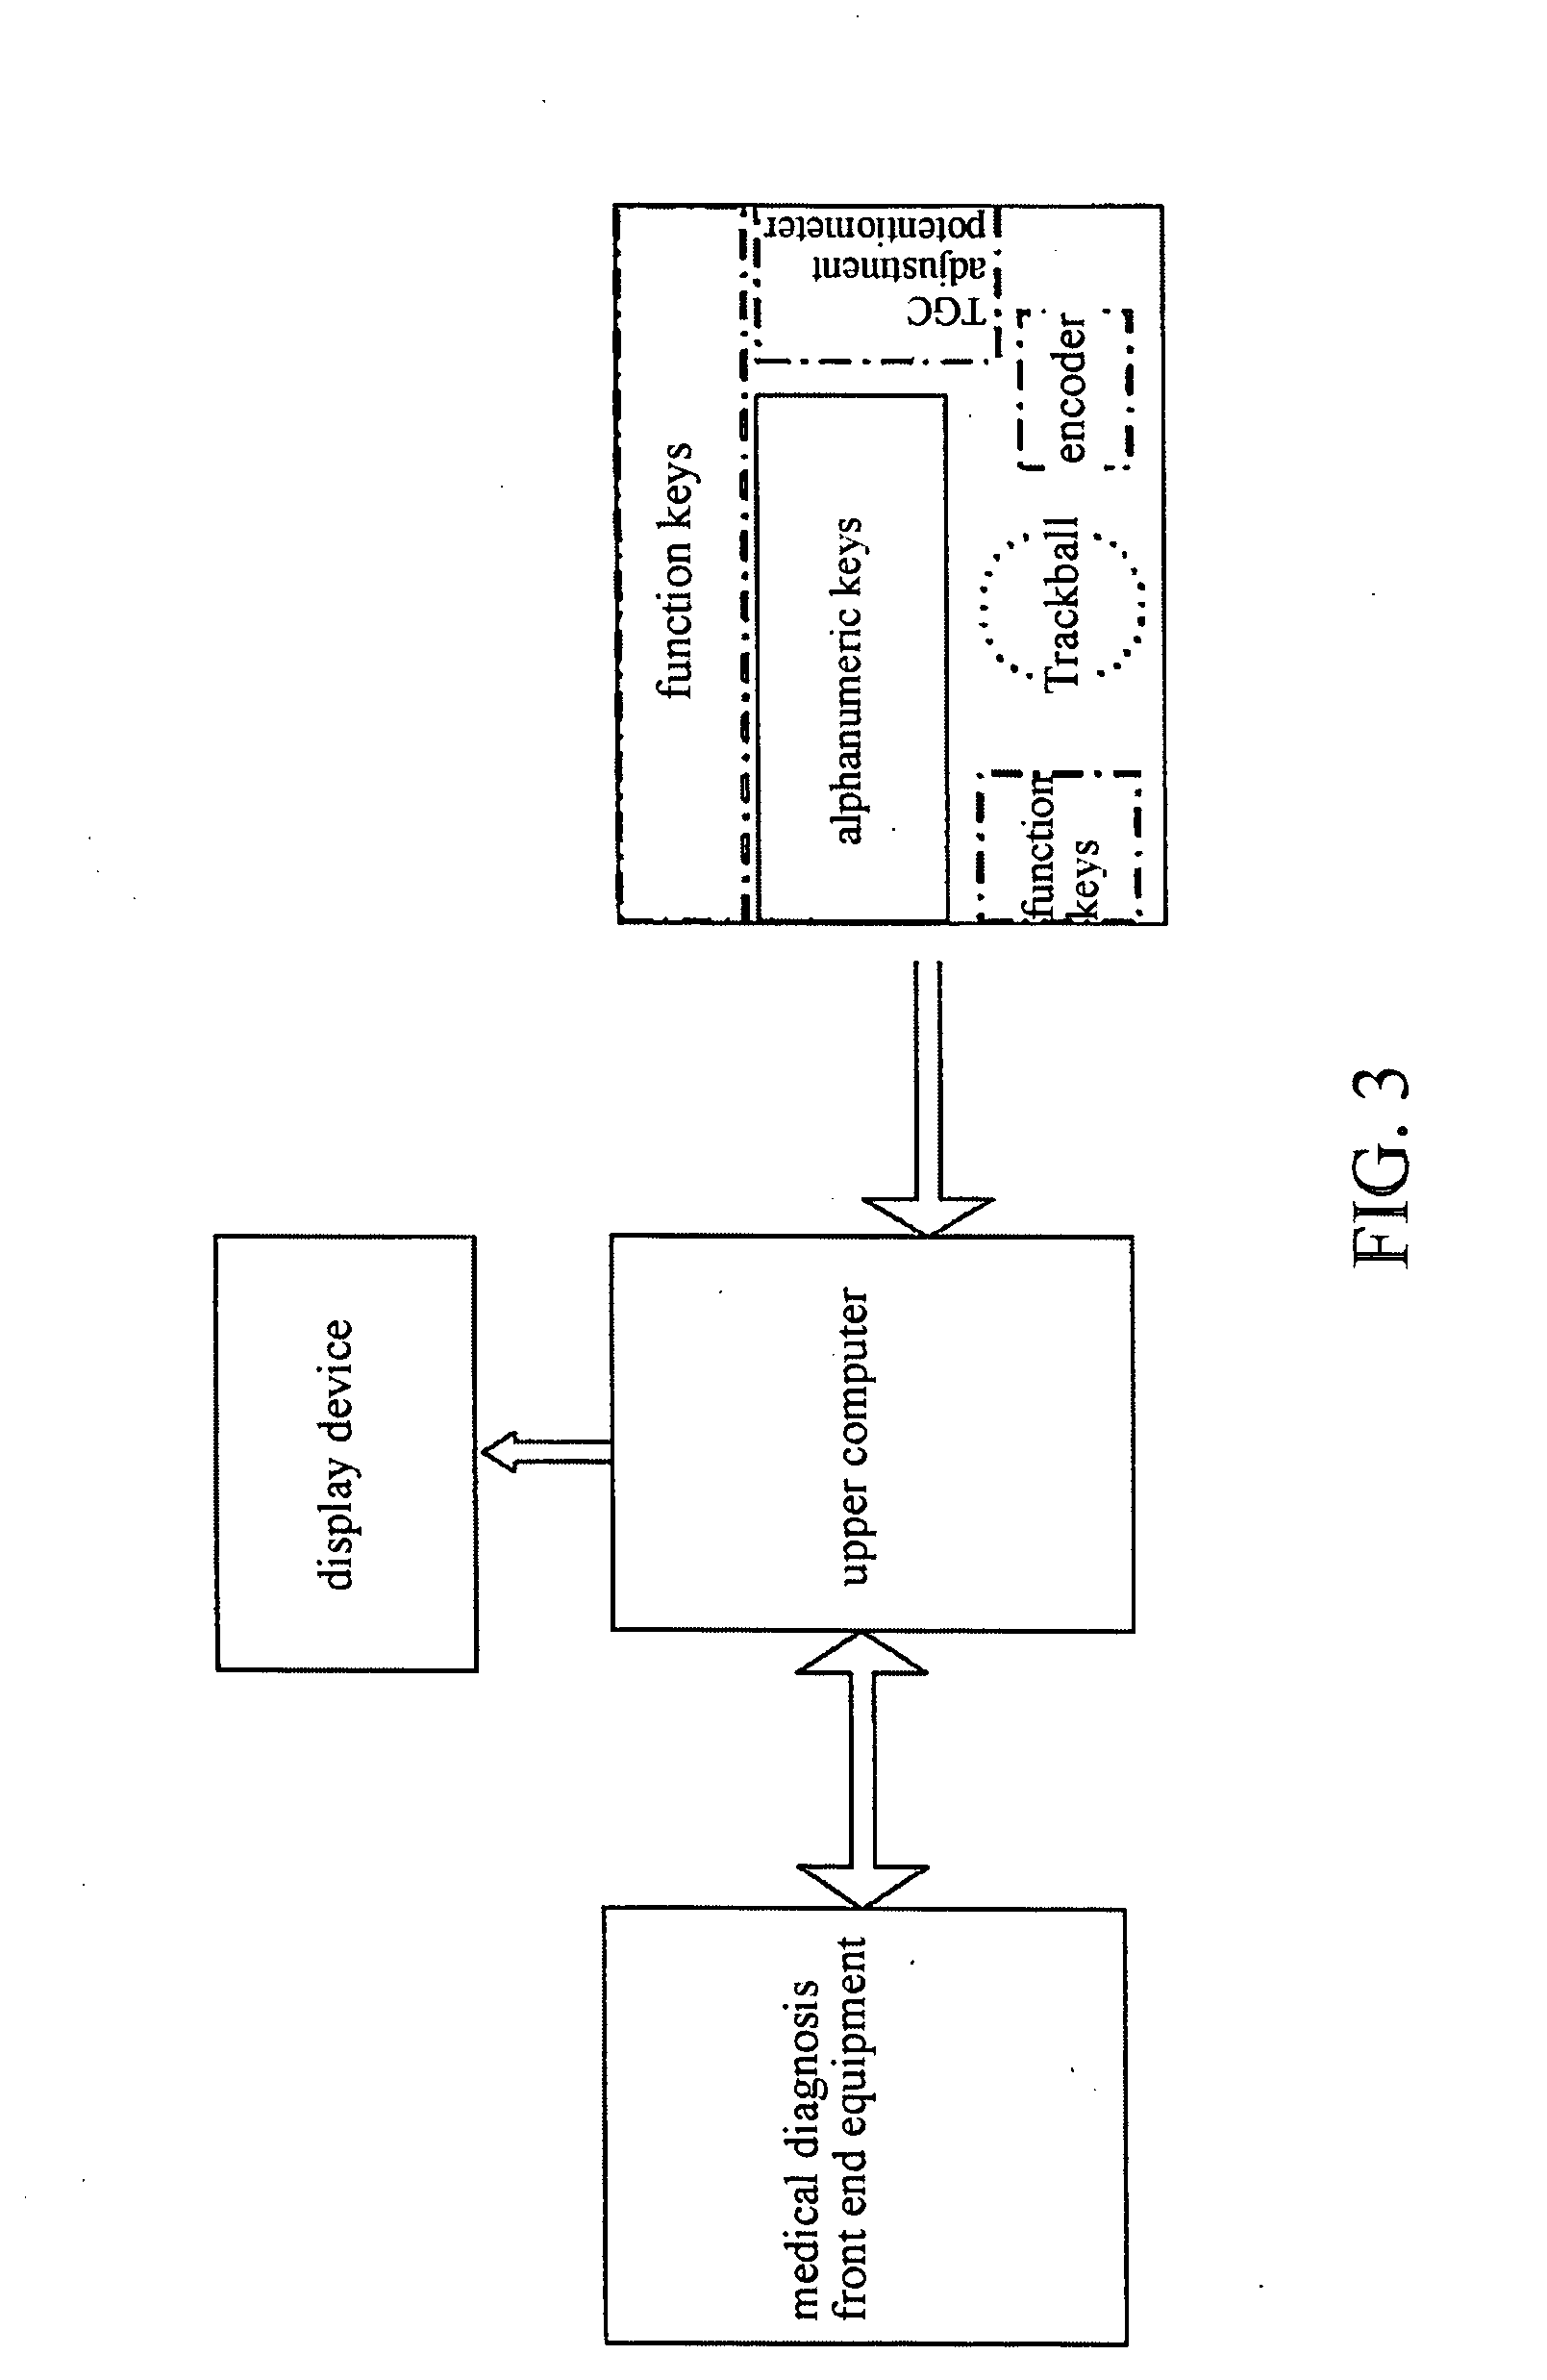 Integrated USB control panel for a medical diagnosis system and a medical diagnosis system using the same